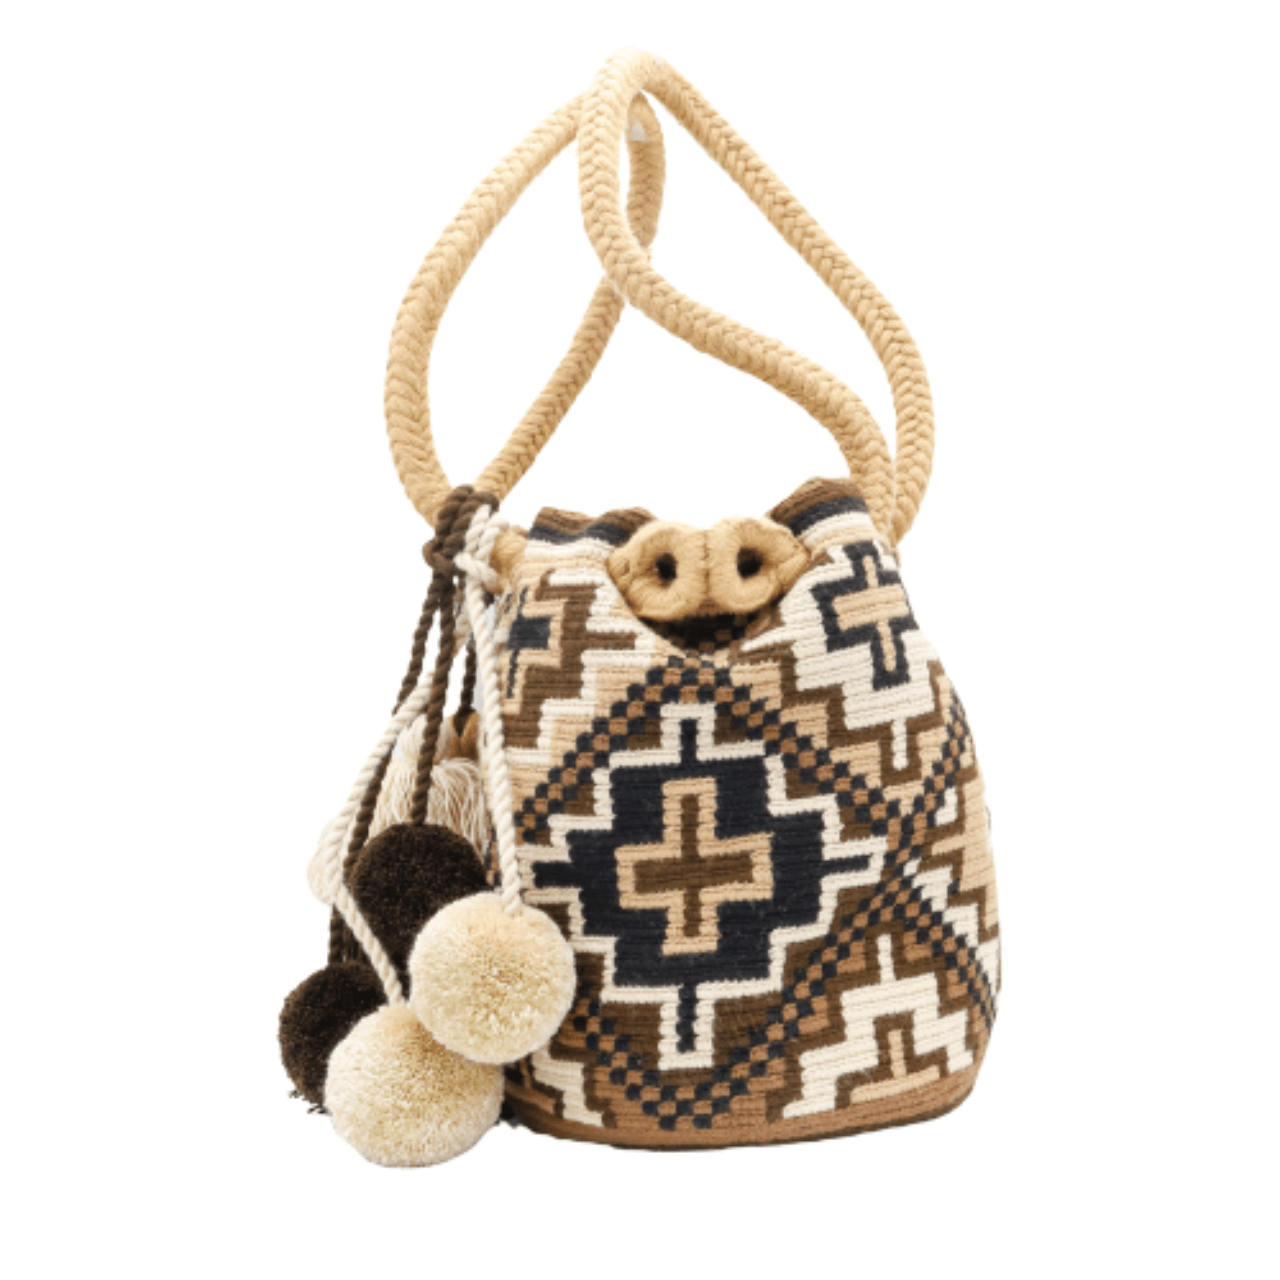 Saskia Crochet Tote Bag - Large Size, Beige and Brown Shades, 2 Braided Handles with Tassels and Pom Poms Decorations.